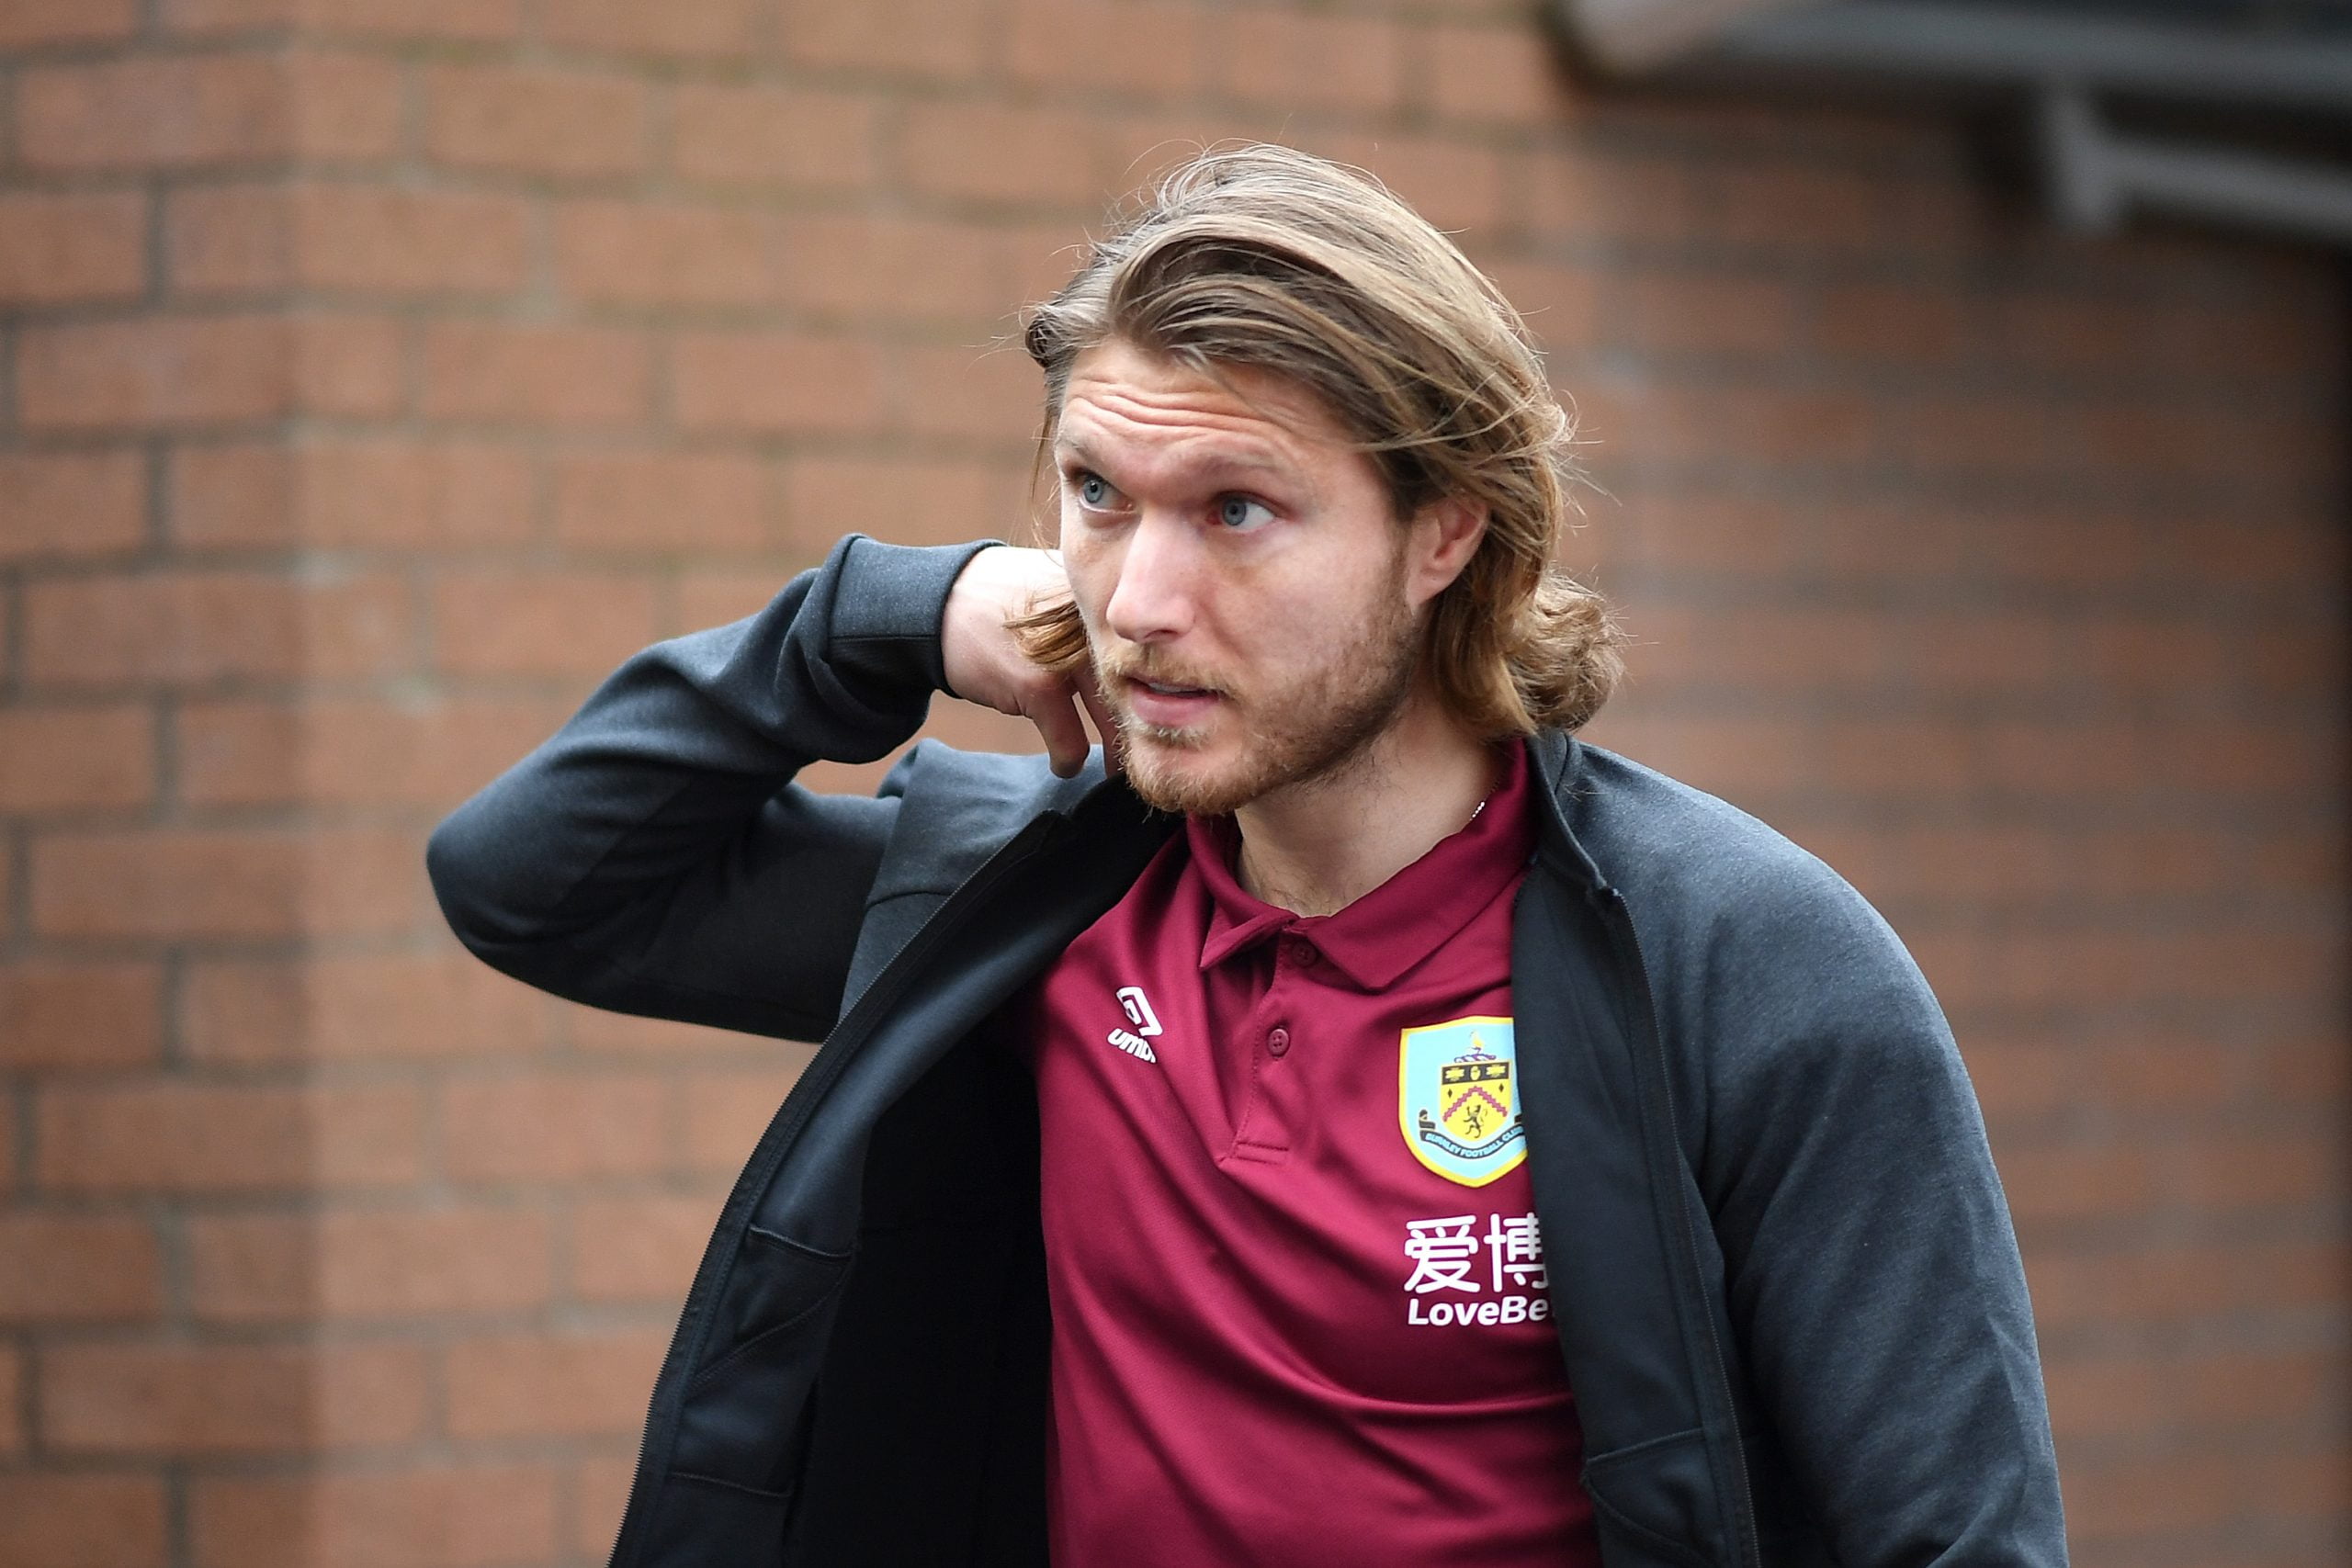 Newcastle United on the verge of signing Jeff Hendrick who is seen in the photo